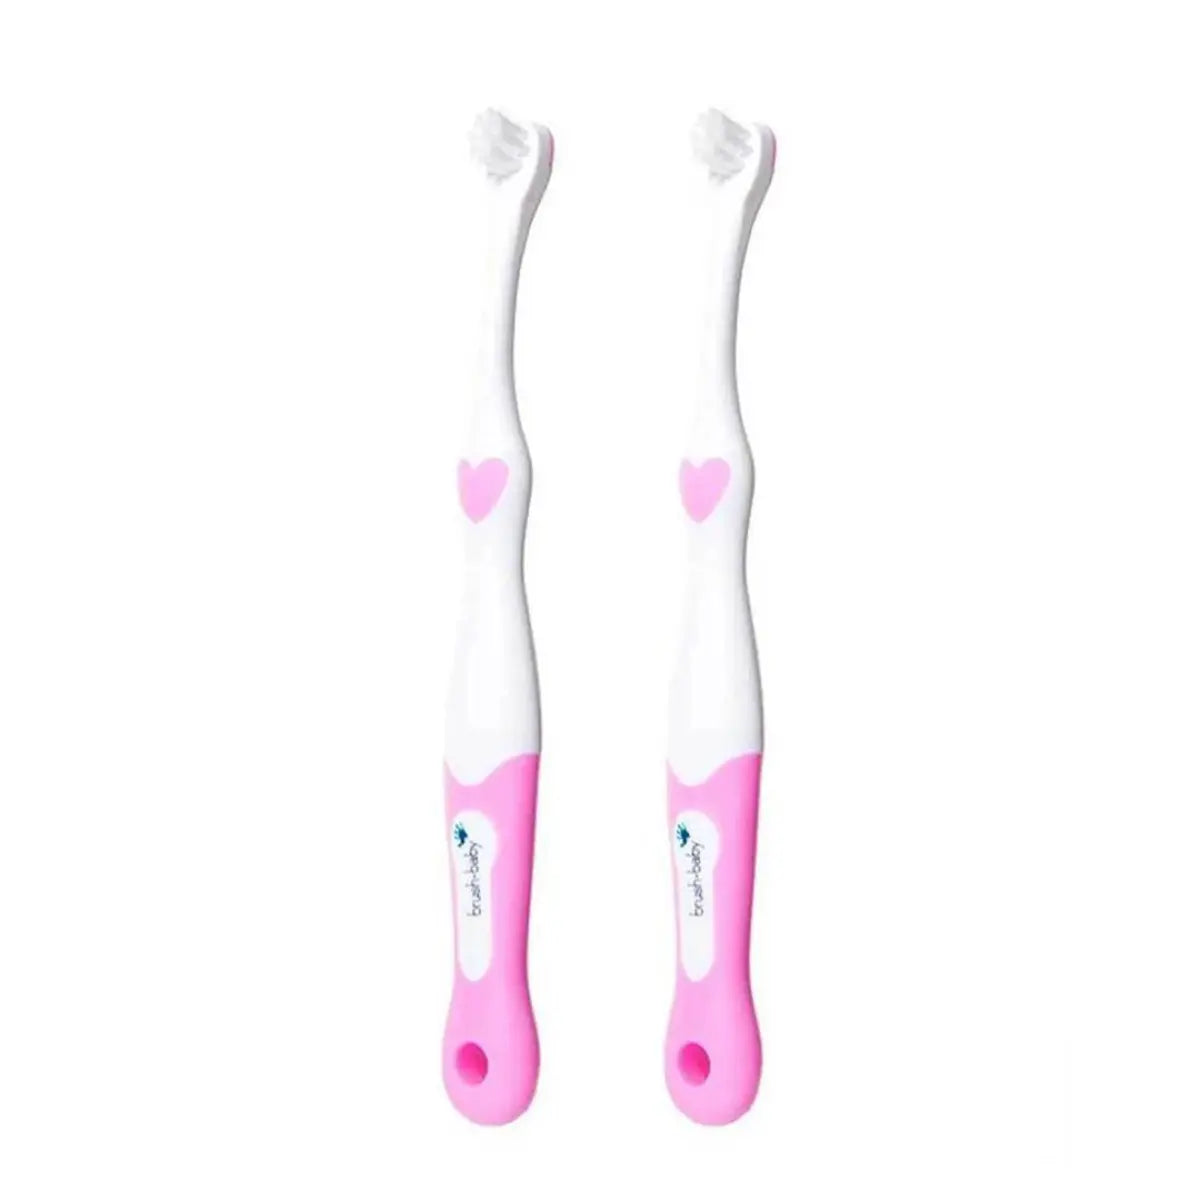 Pink firstbrush first toothbrush for babies and toddlers